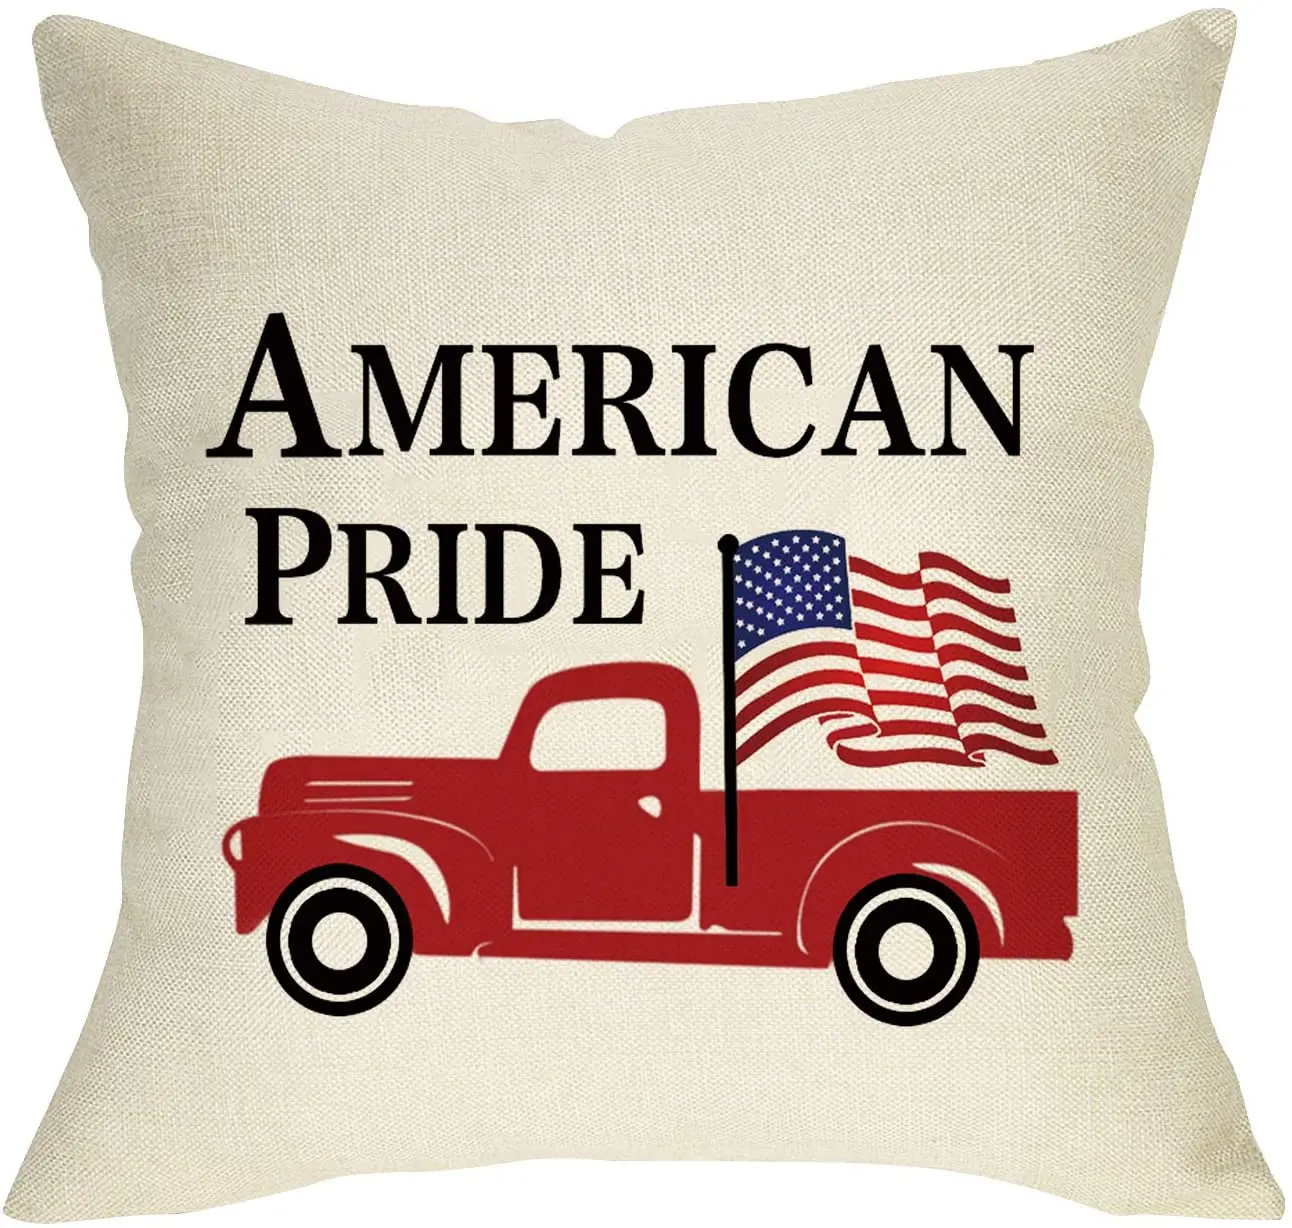 

Softxpp American Pride Home Decorative Throw Pillow Cover, Patriotic July 4th USA Flag Cushion Case Decor Red Truck Sign